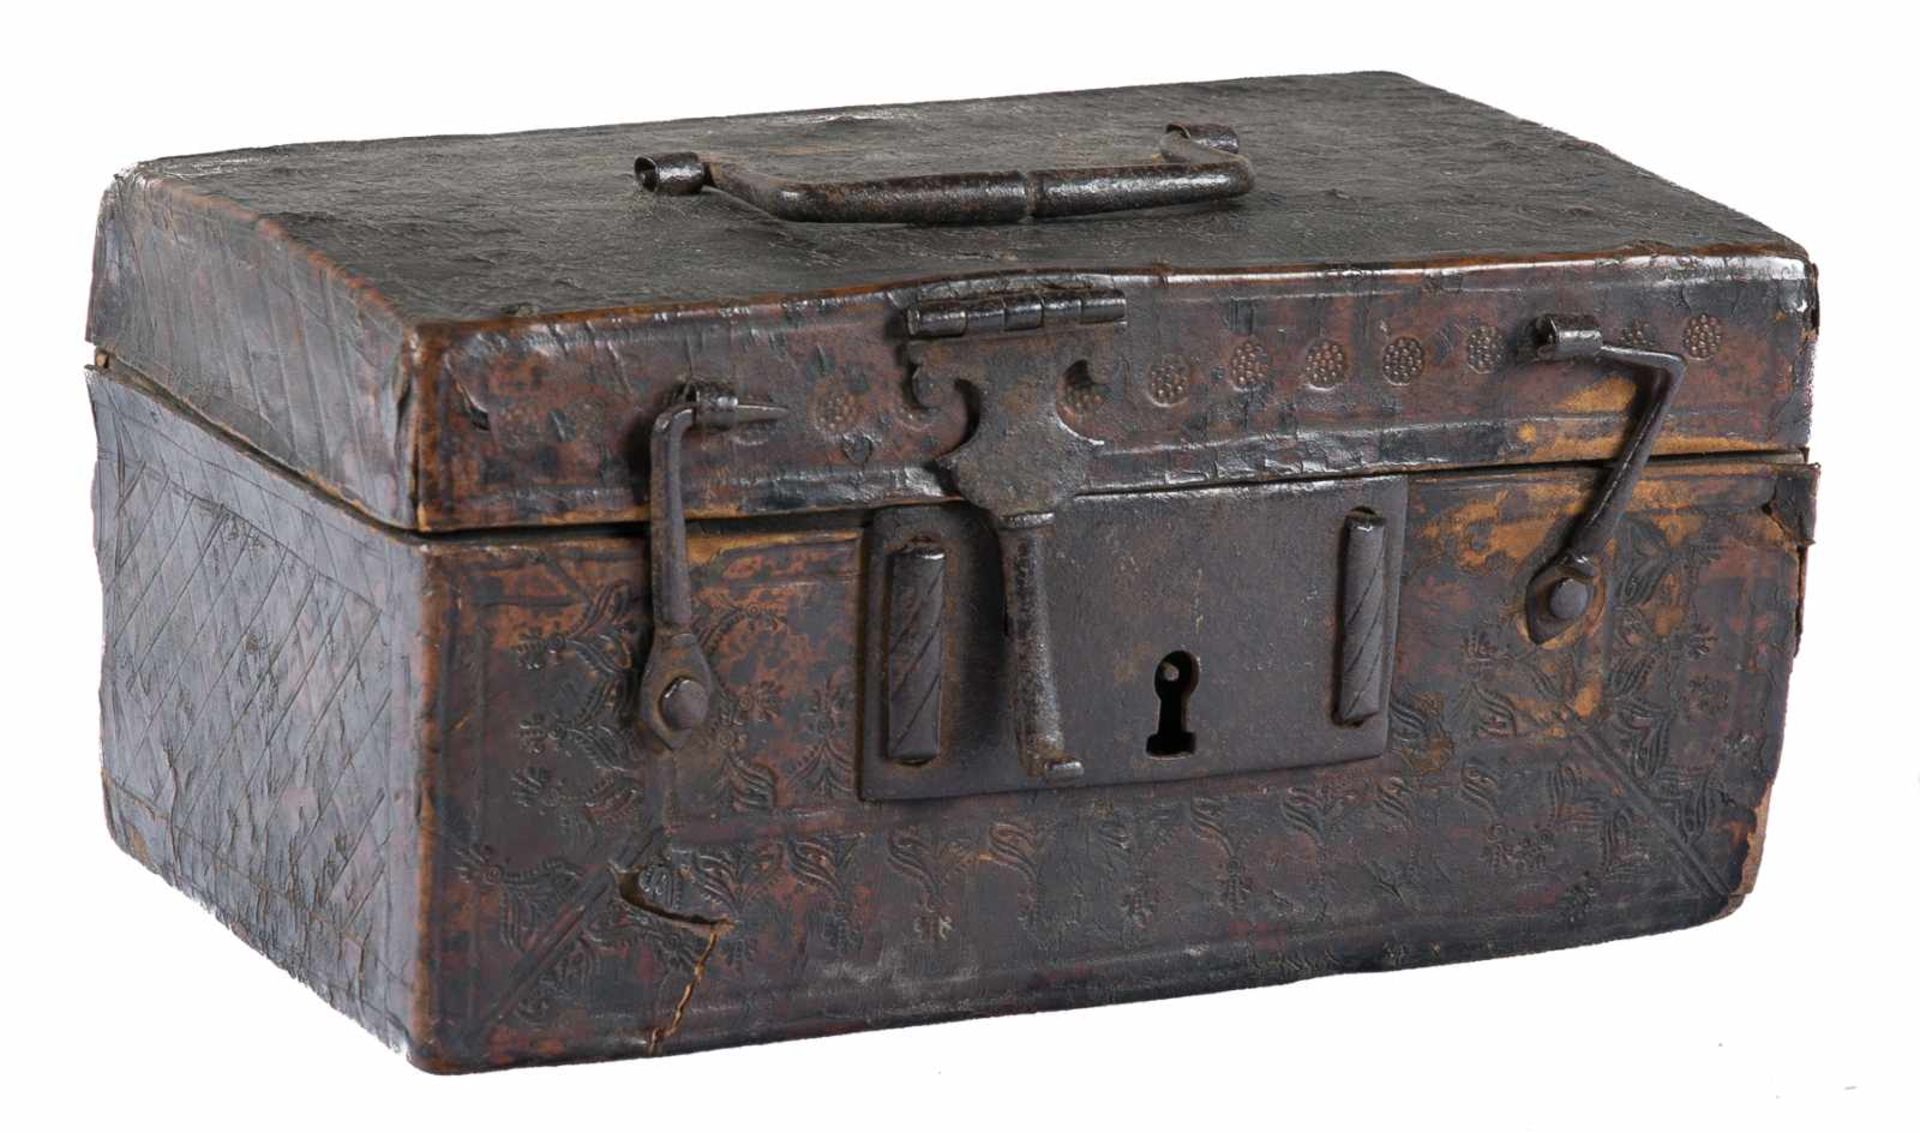 Engraved cordovan leather chest with iron fittings and wooden base. 15th century. ↵↵Flaws. 9 x 18 - Bild 3 aus 5